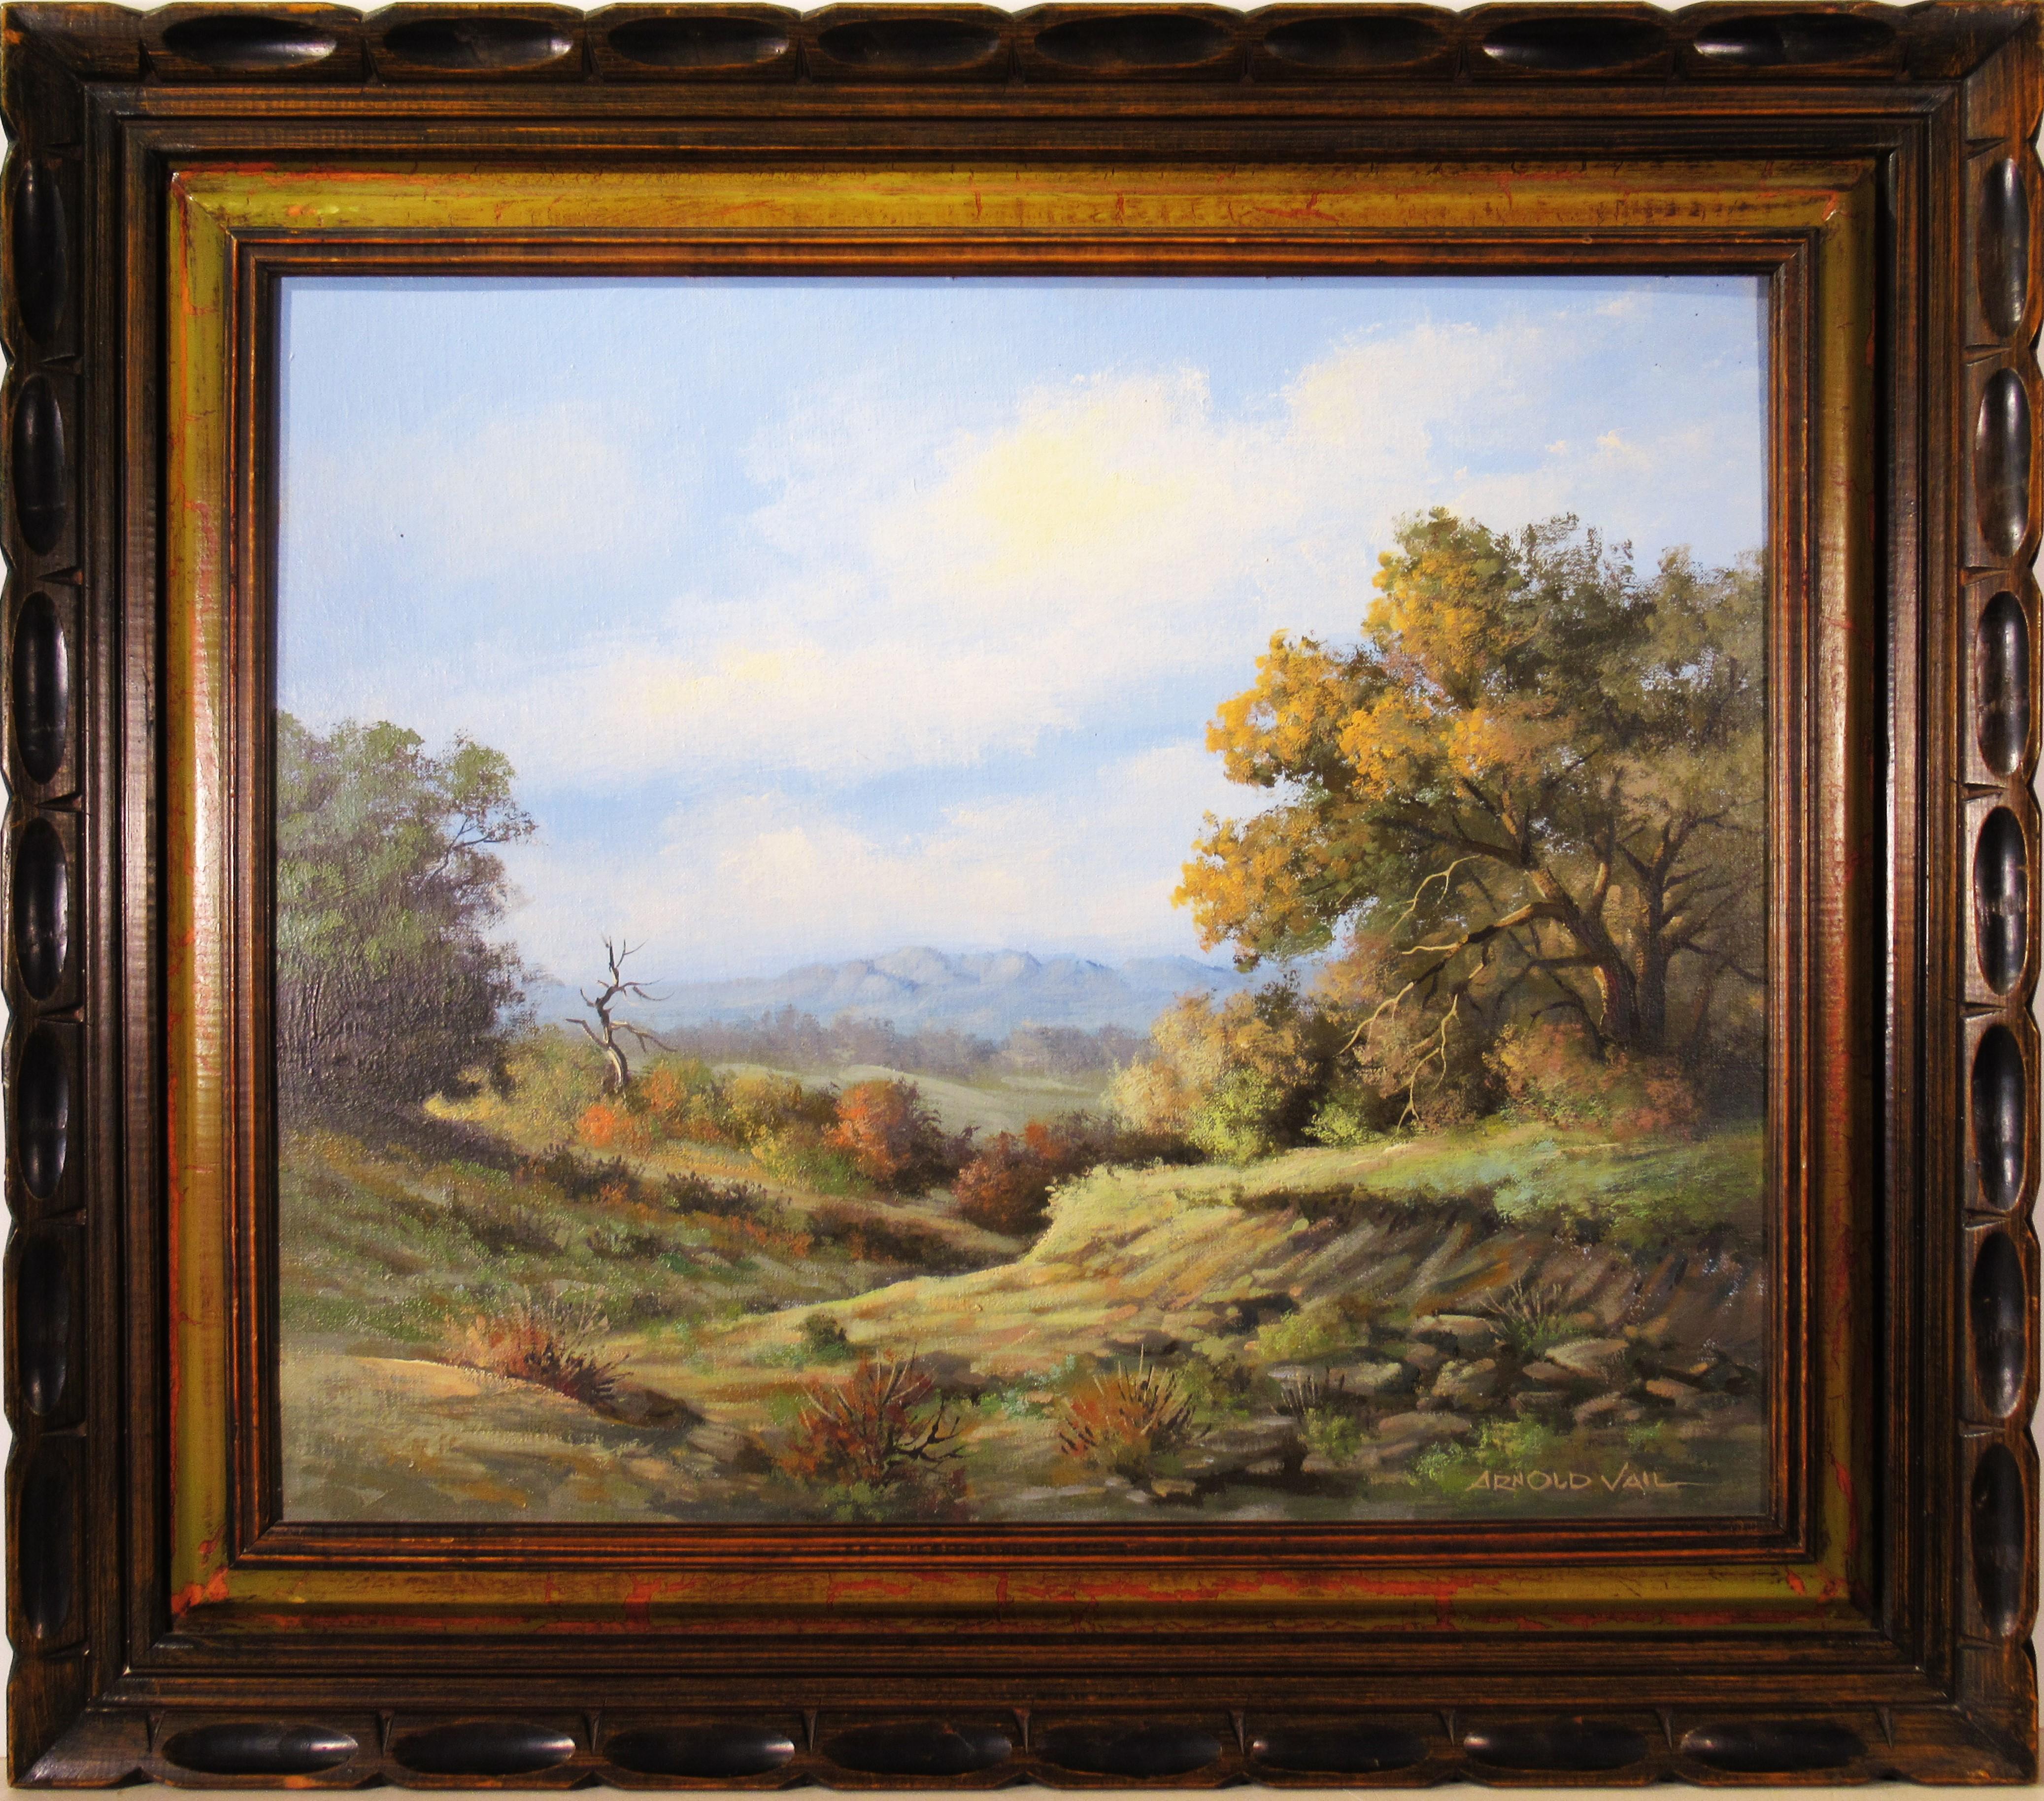 Arnold Vail Figurative Painting - Texas Hill Country